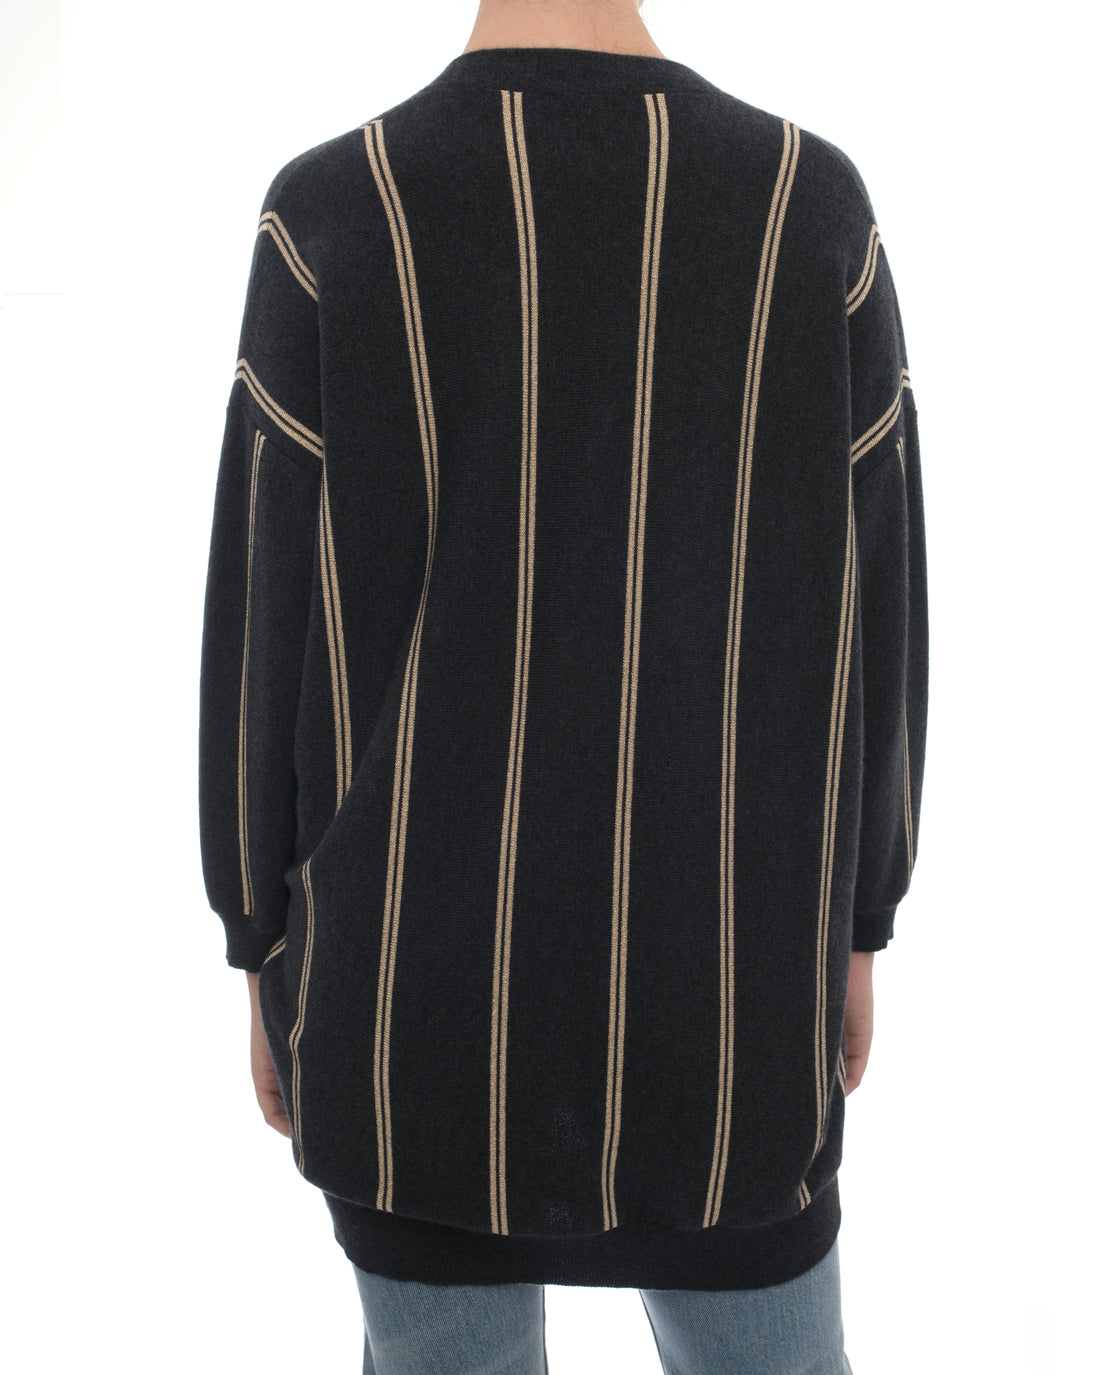 Brunello Cucinelli Grey and Gold Striped Cardigan with Crest - S